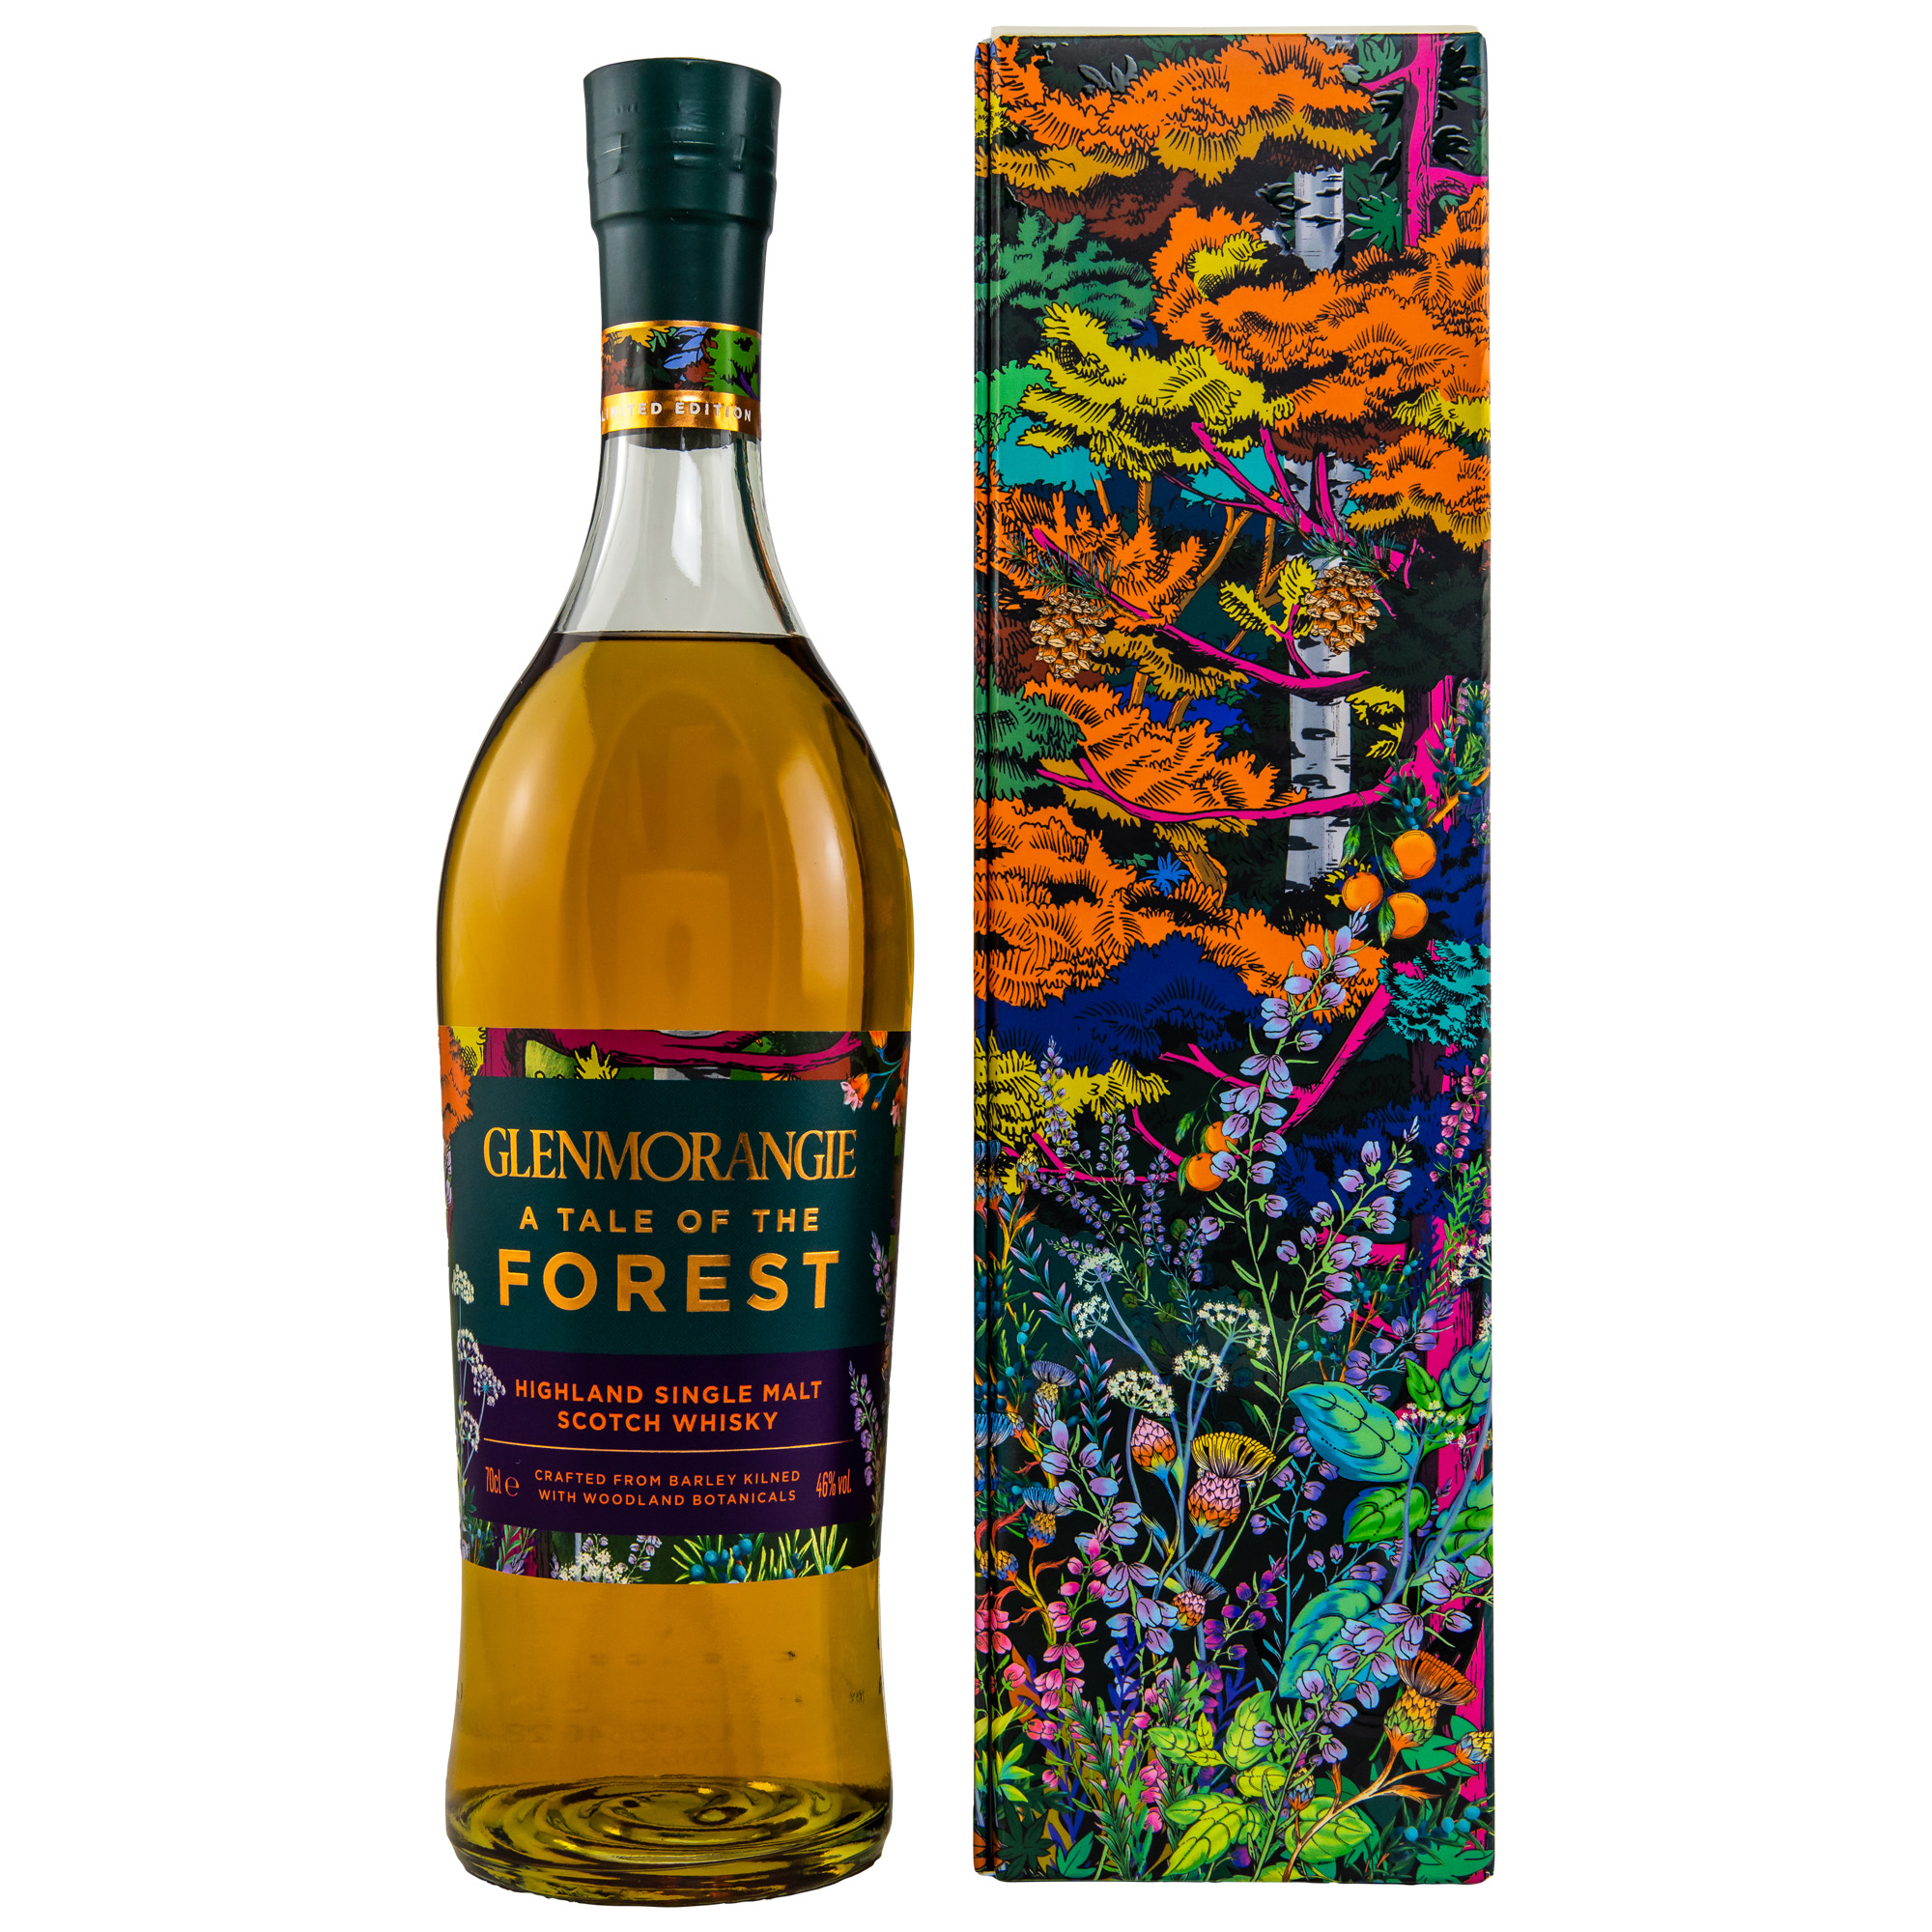 Glenmorangie - A Tale of the Forest - 0,7l 46%vol.